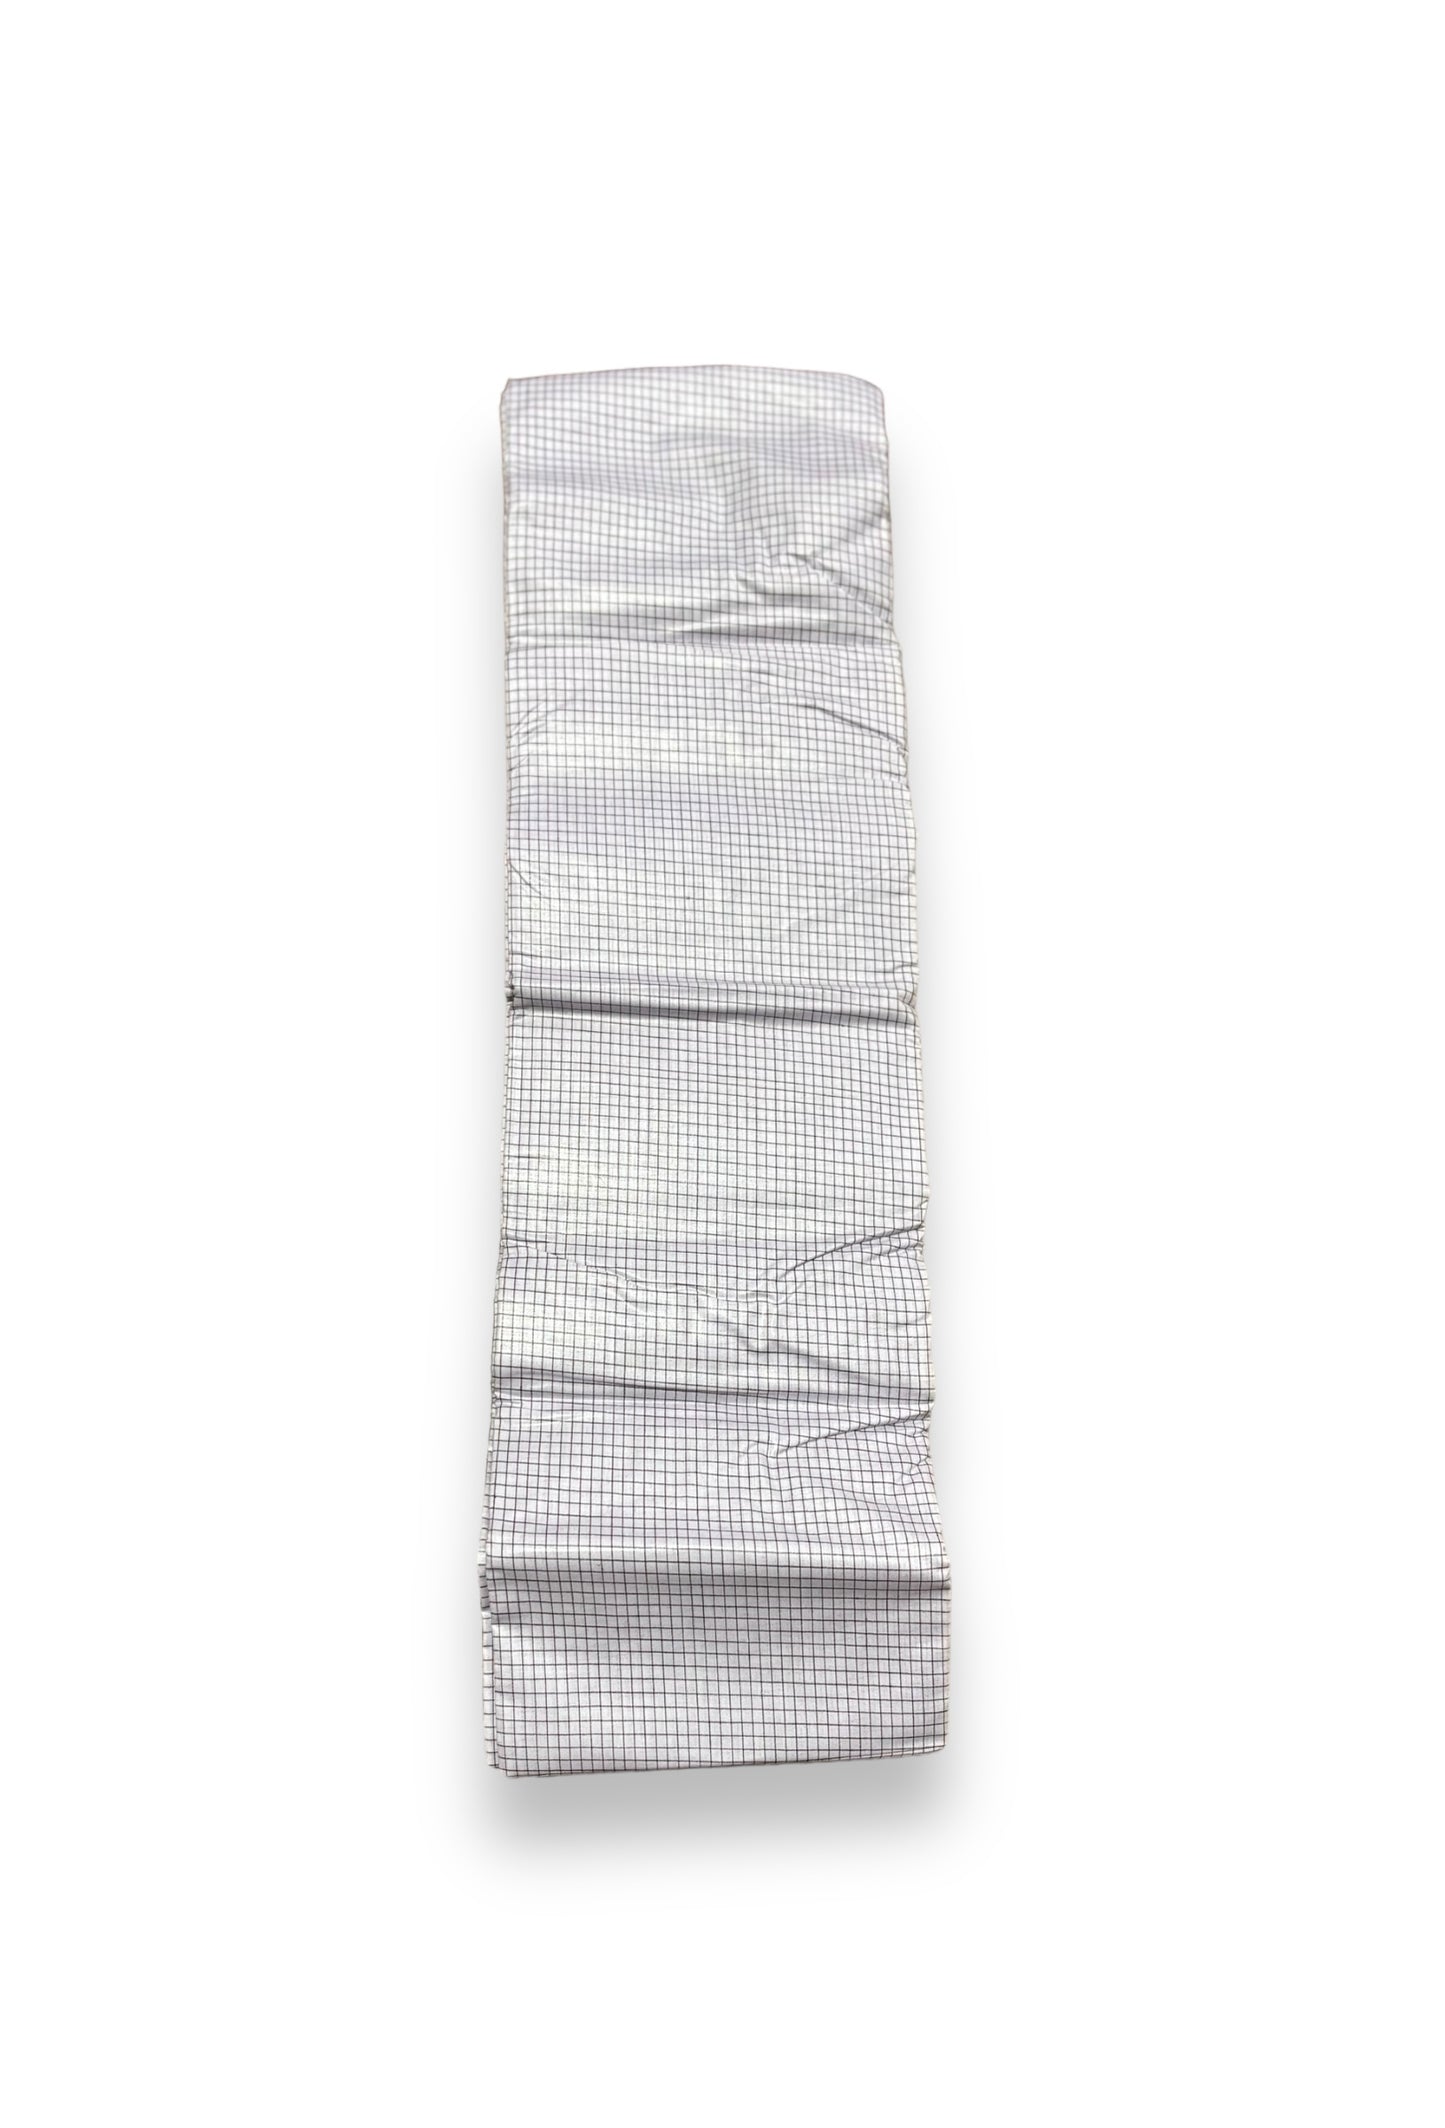 Classic Comfort: Cotton Lungi for Men - Stay Cool and Relaxed- 101